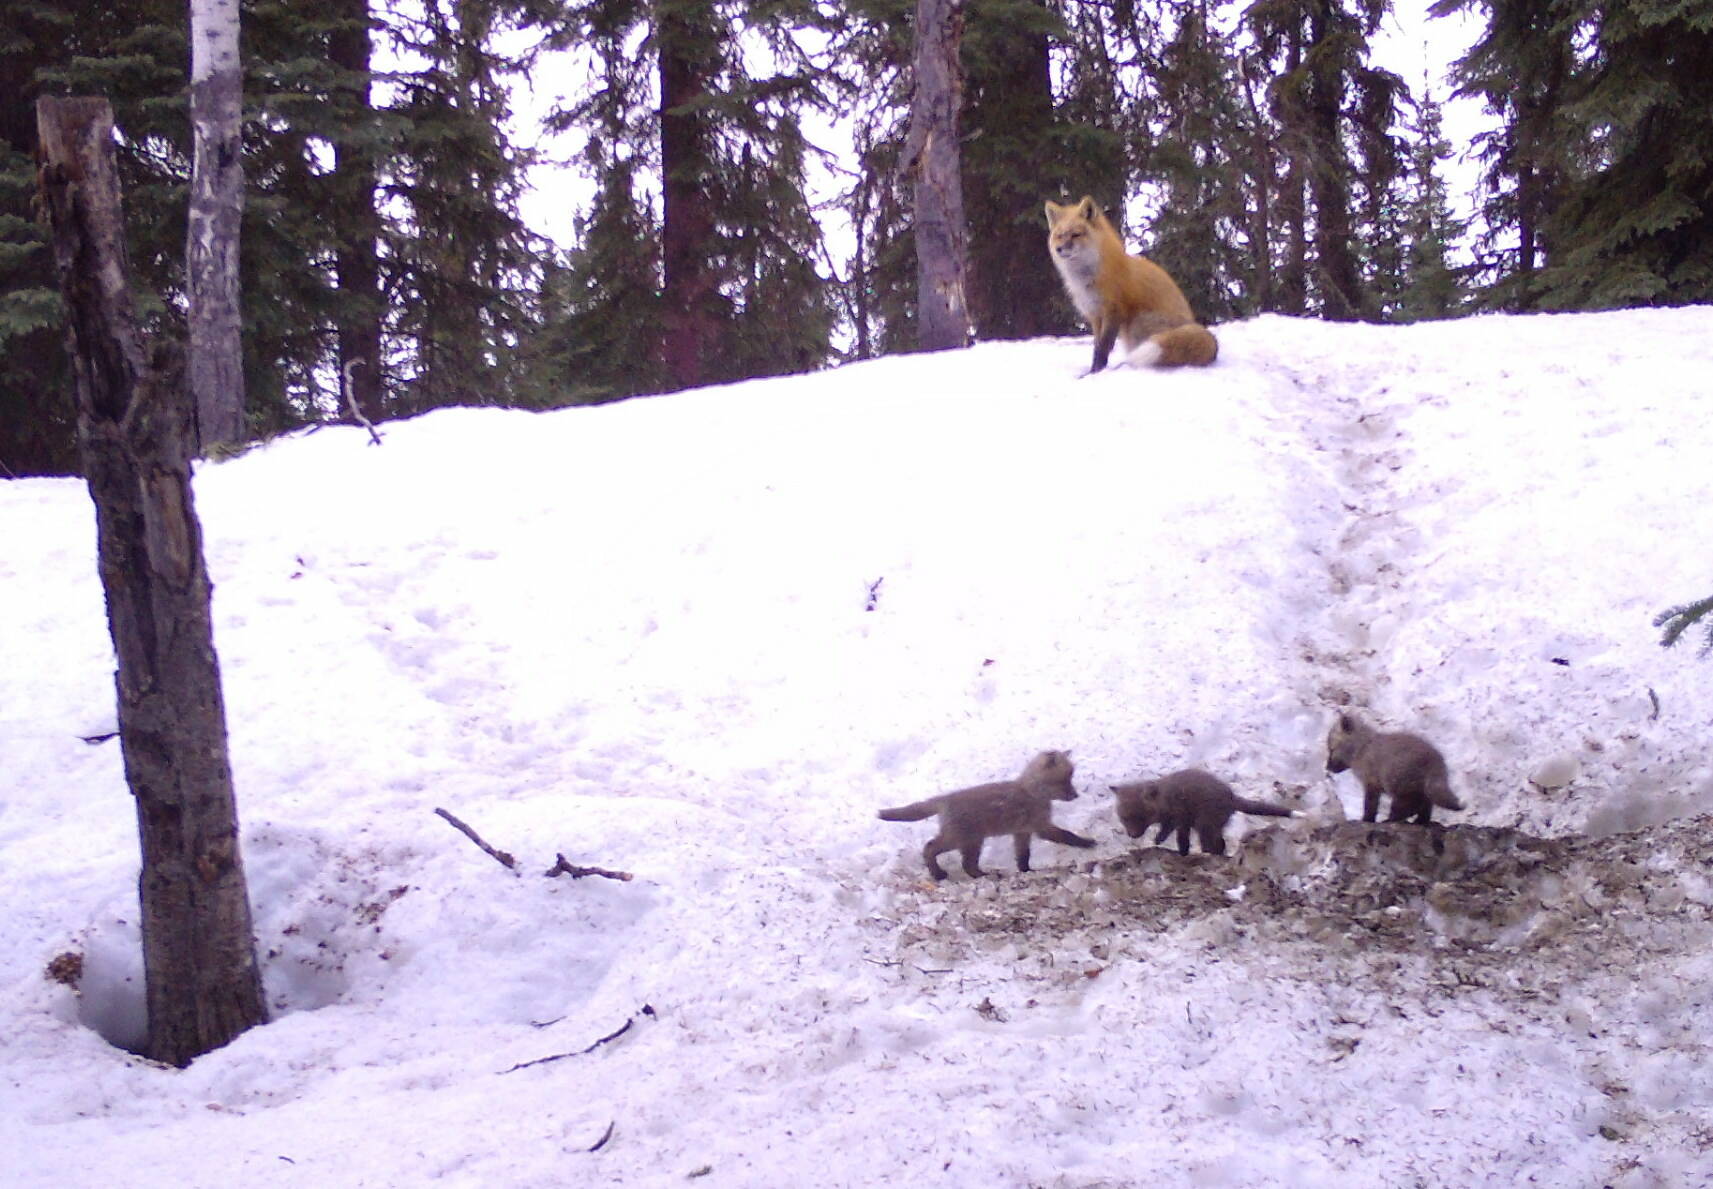 Three fox kits emerge from their birthing den while a parent fox watches from above in Interior Alaska. (Photo by Ned Rozell)